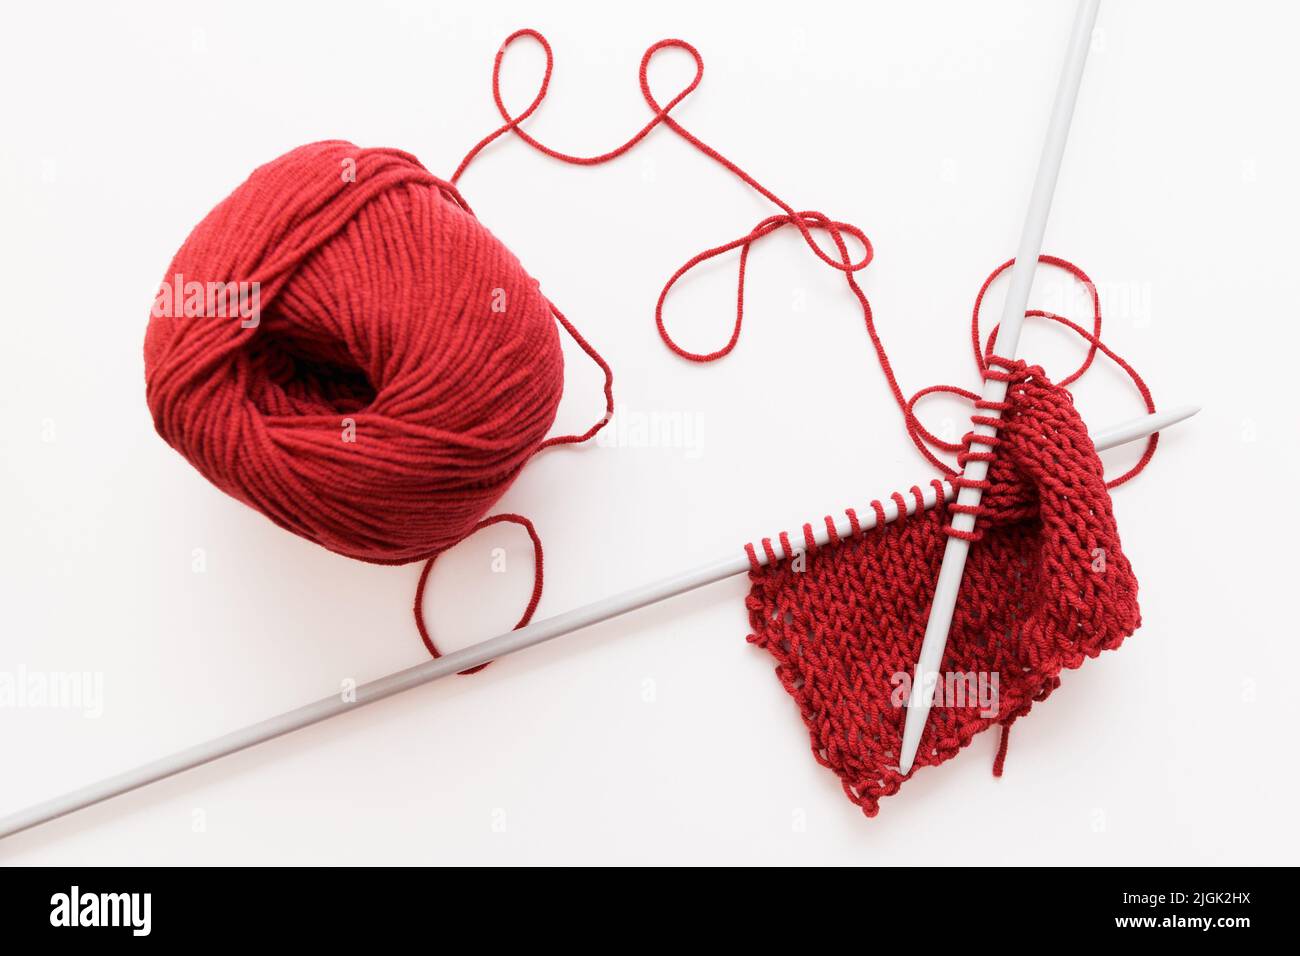 Red woolen thread and knitting needle isolated Stock Photo